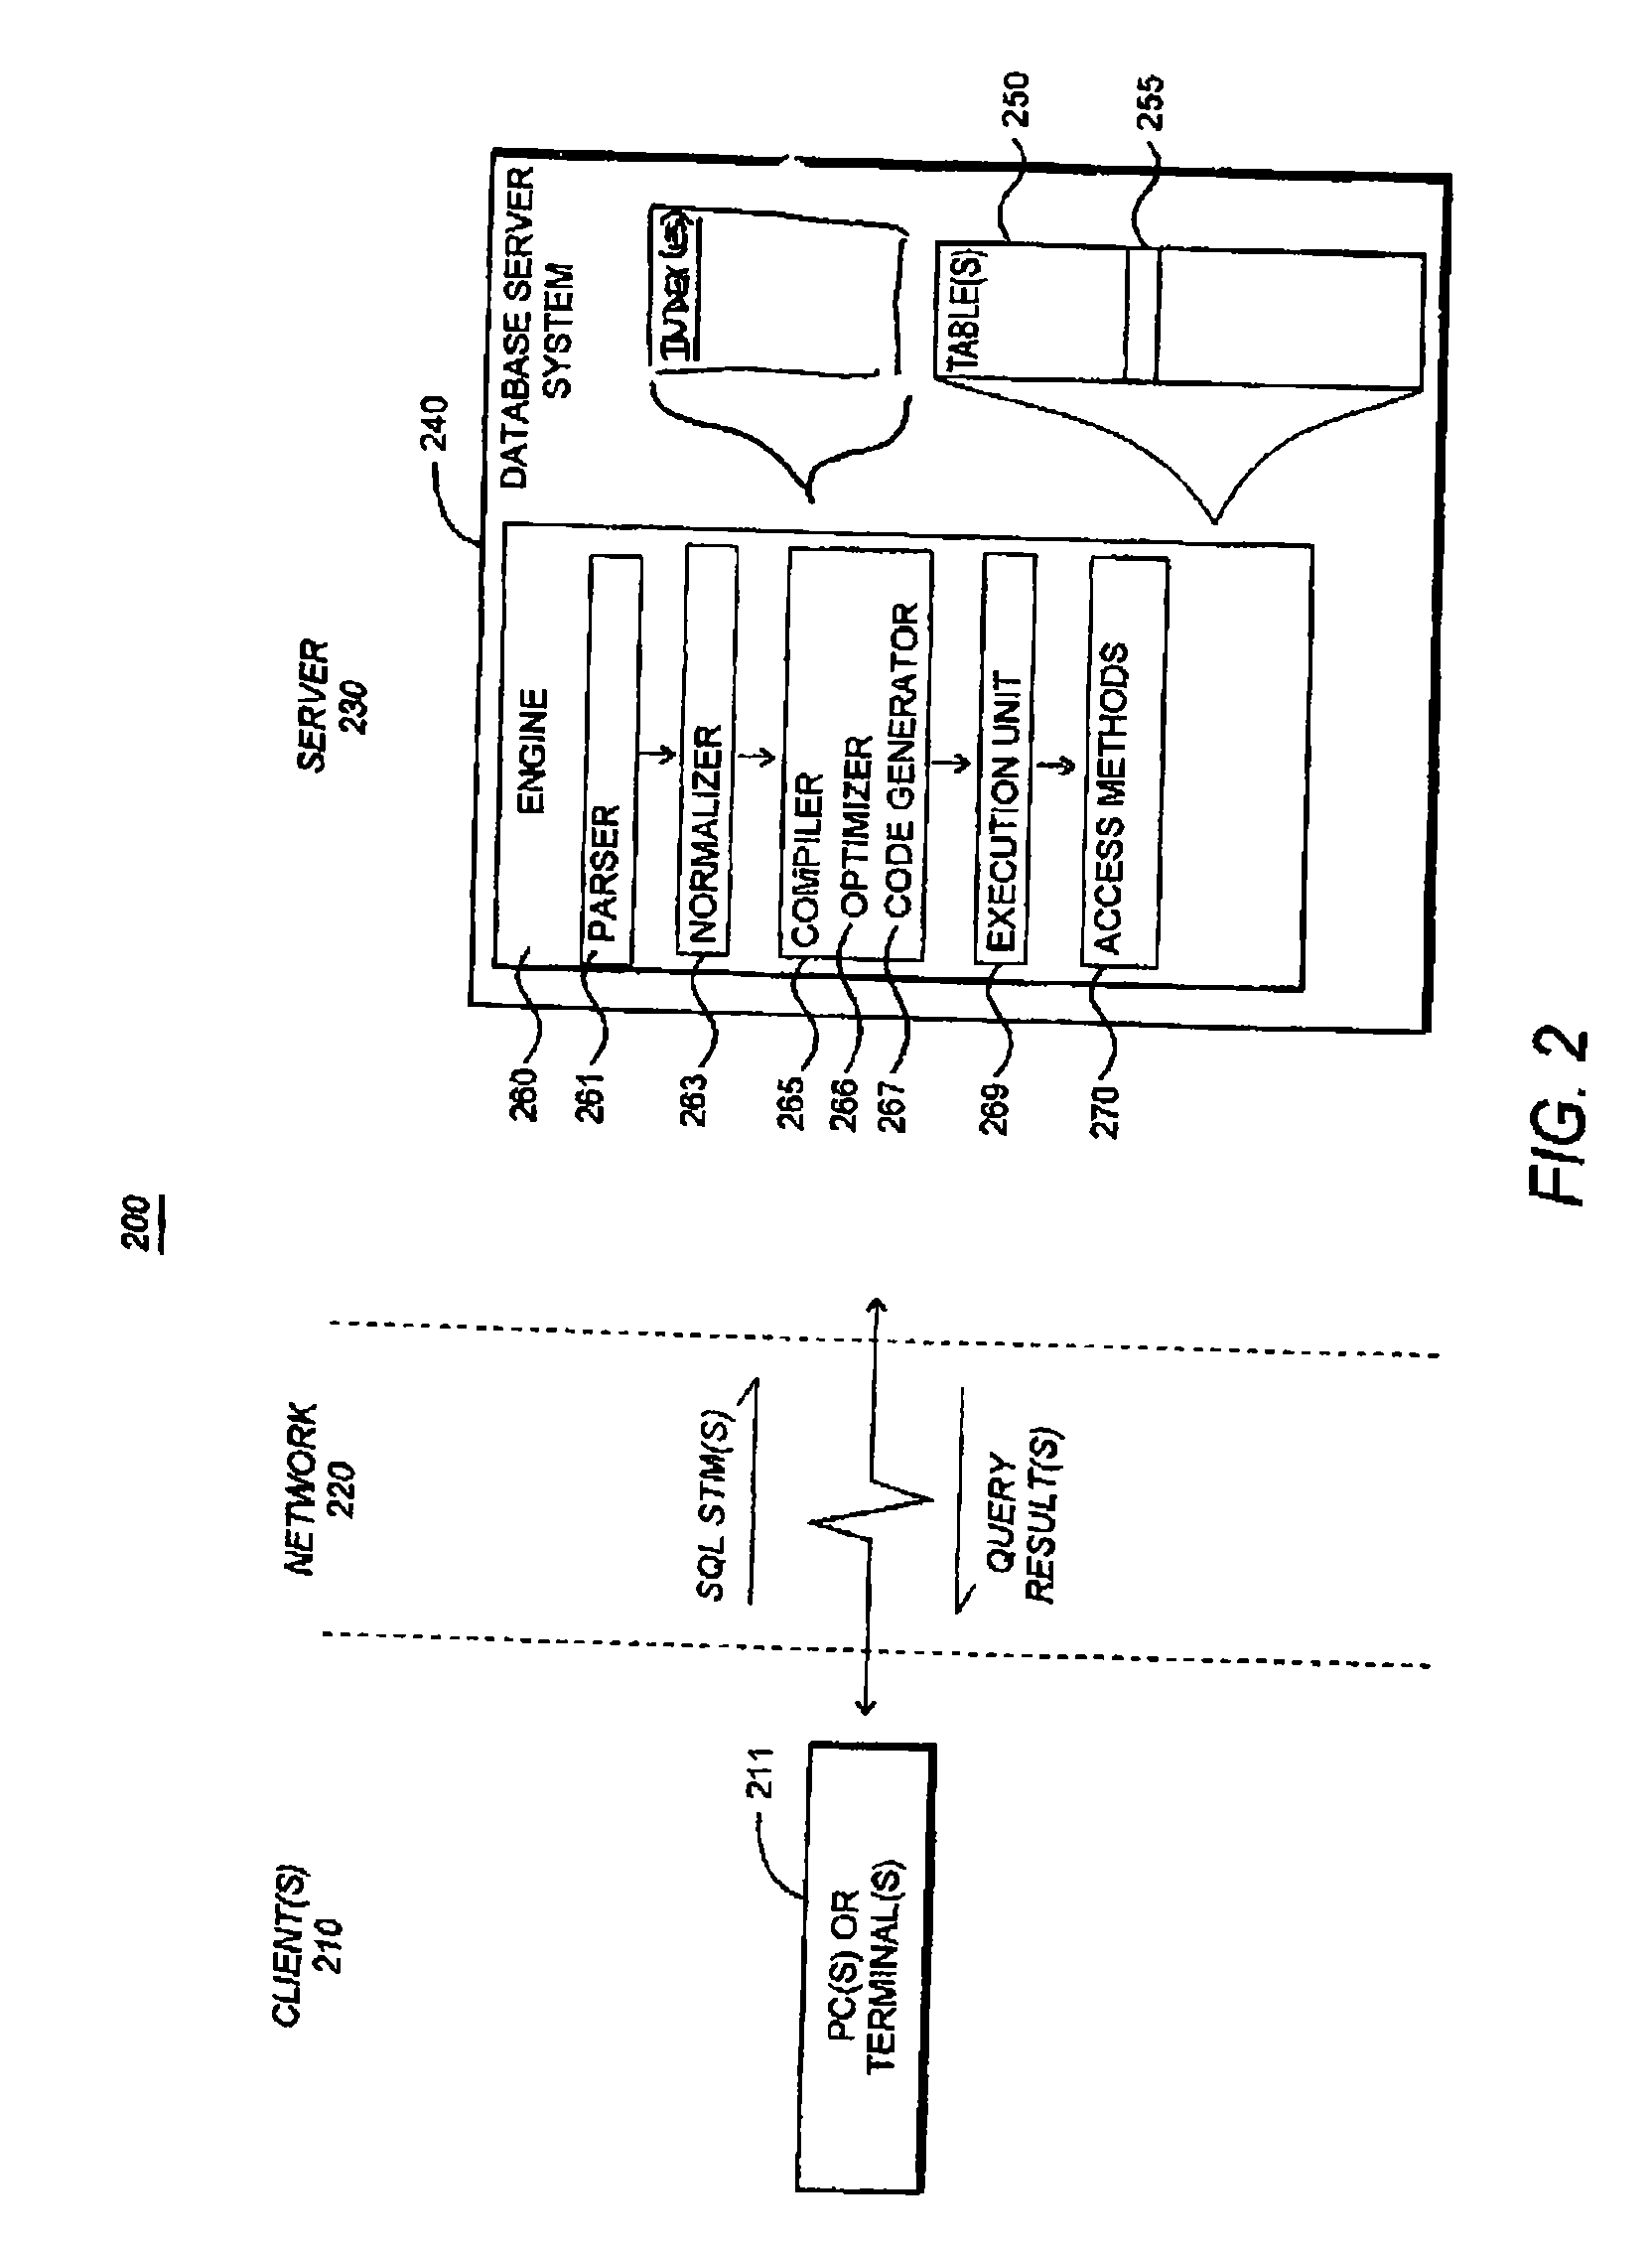 Data Compression For Reducing Storage Requirements in a Database System